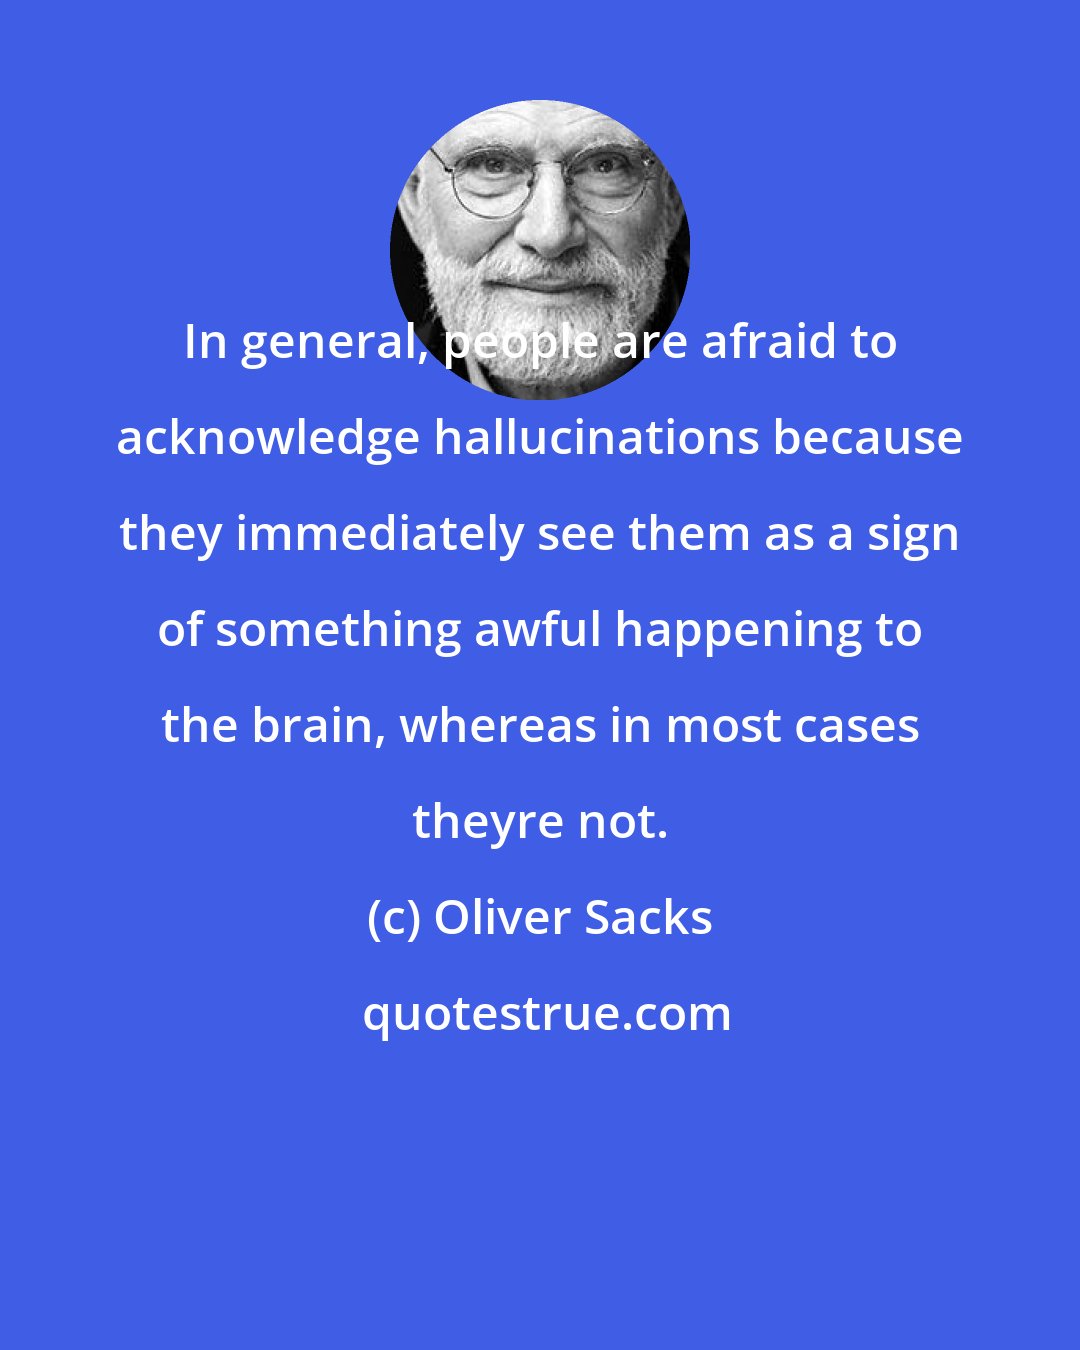 Oliver Sacks: In general, people are afraid to acknowledge hallucinations because they immediately see them as a sign of something awful happening to the brain, whereas in most cases theyre not.